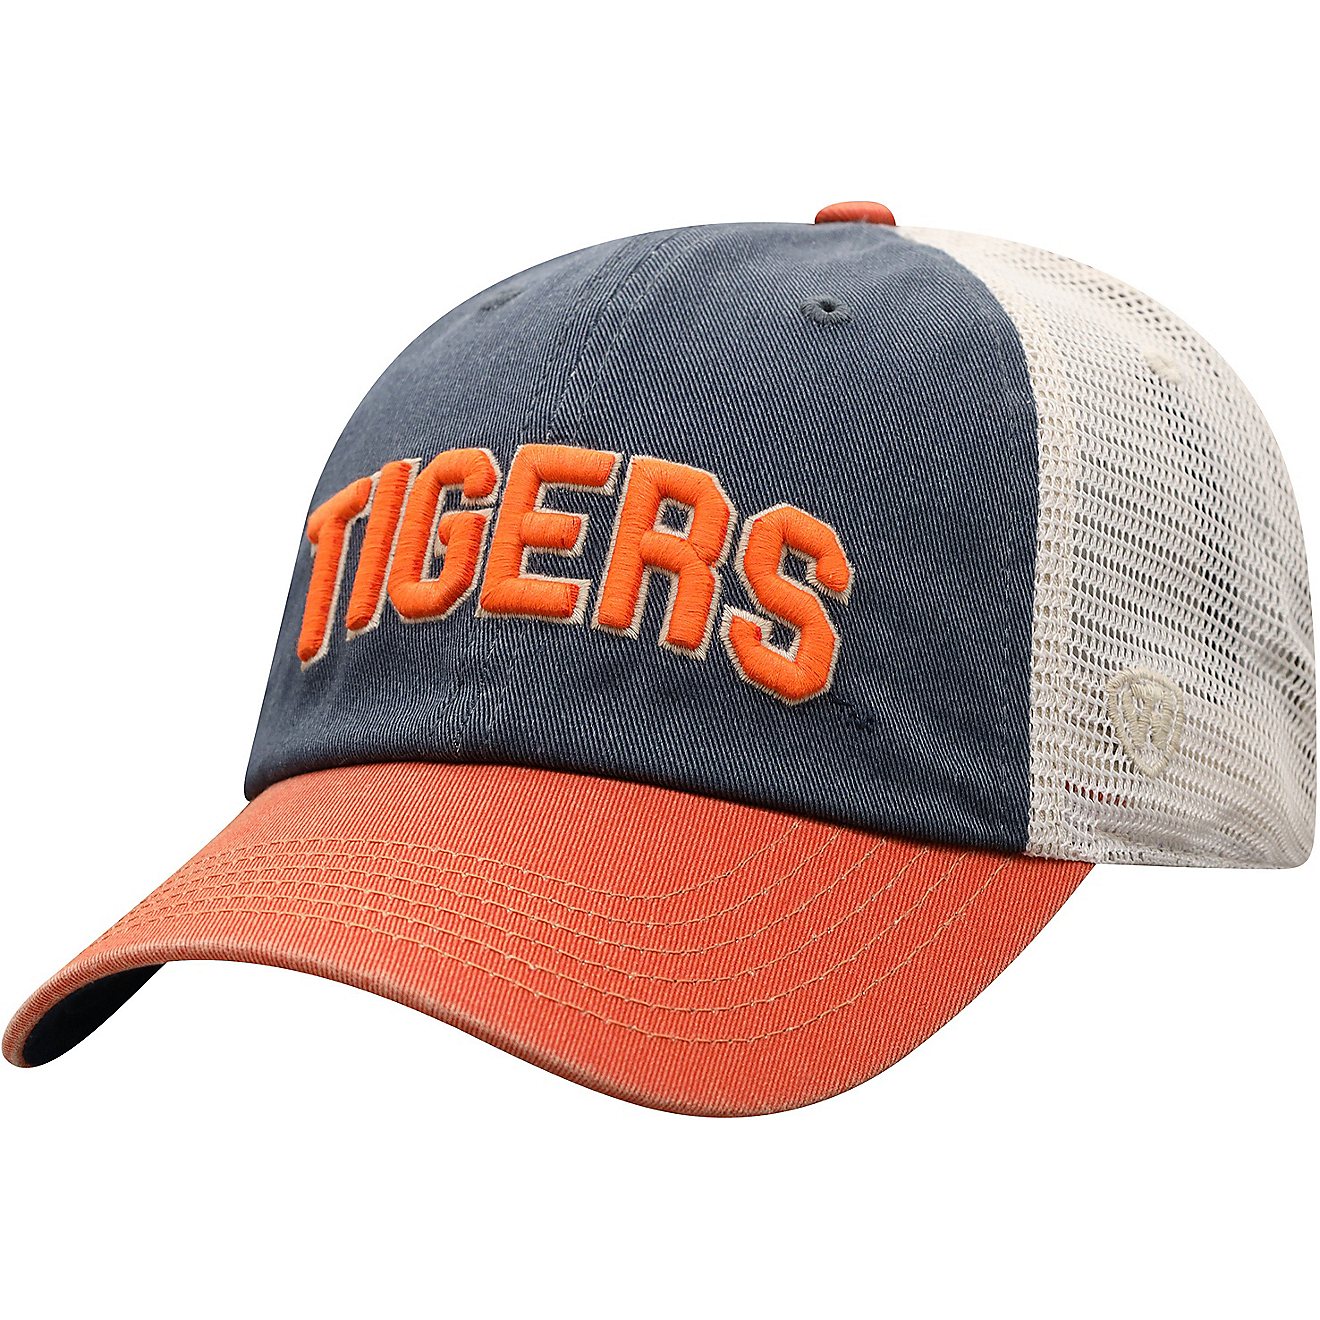 Top of the World Men's Auburn University Andy 3-Tone Cap                                                                         - view number 3